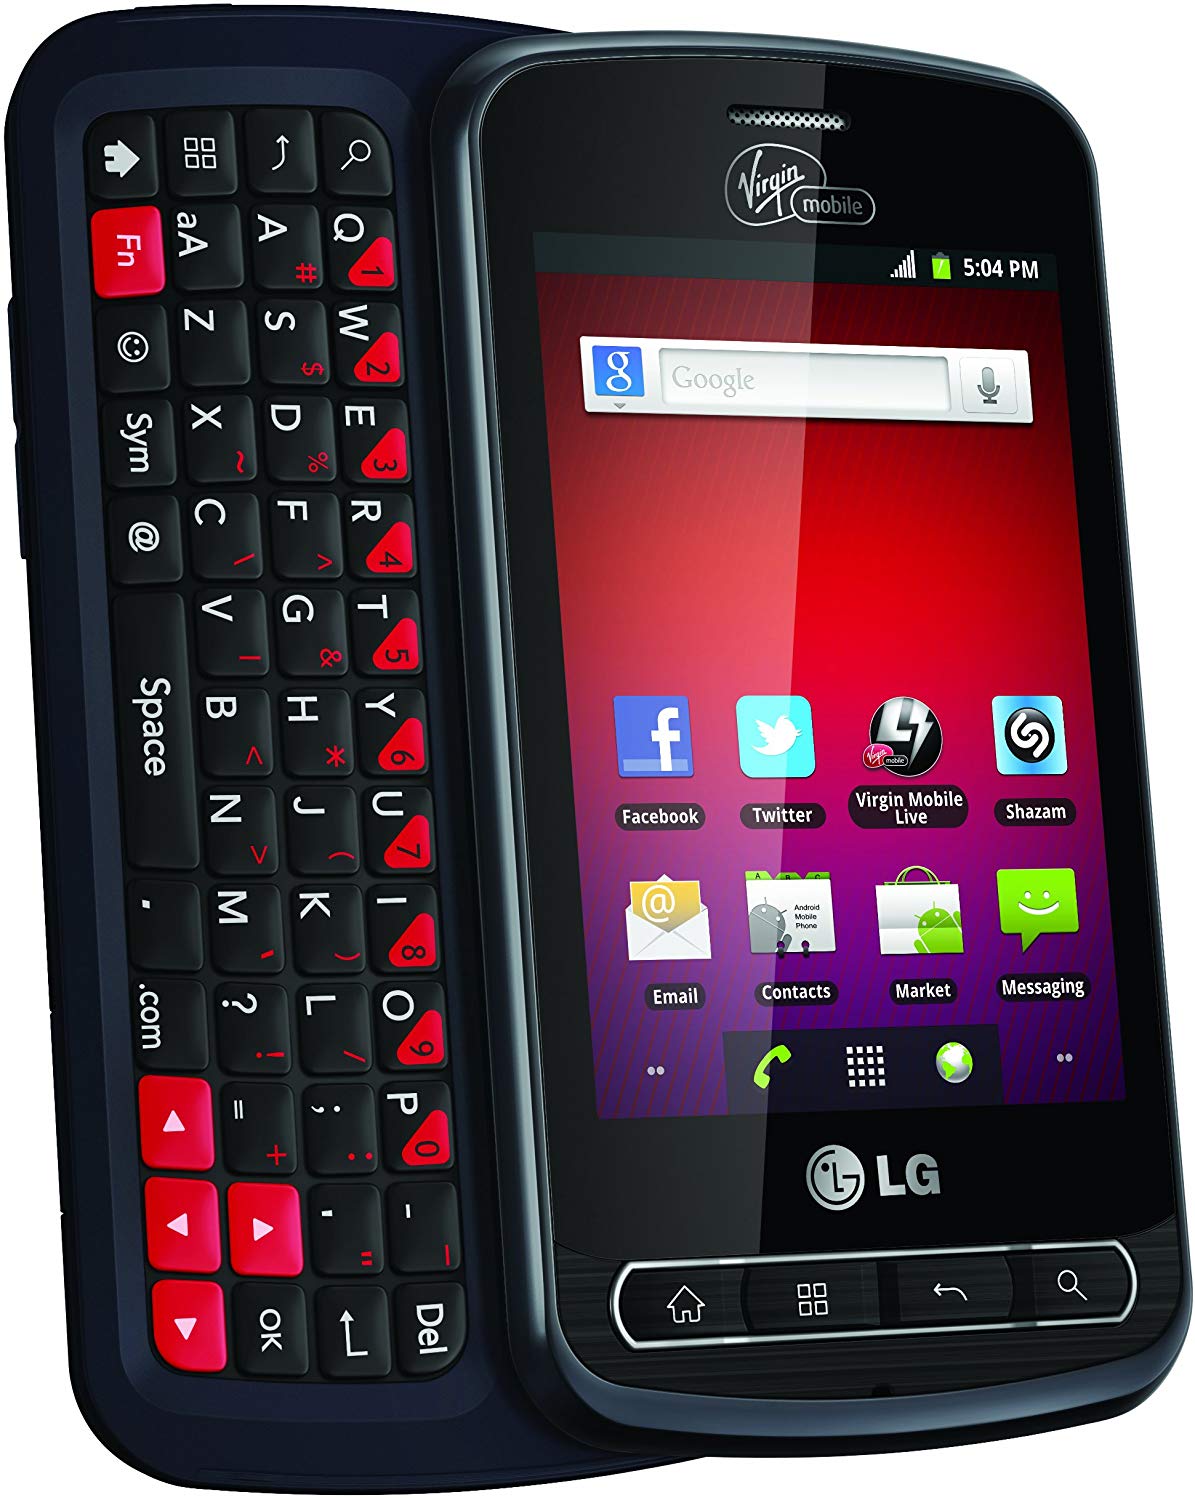 LG Optimus Slider  Price And Specifications.